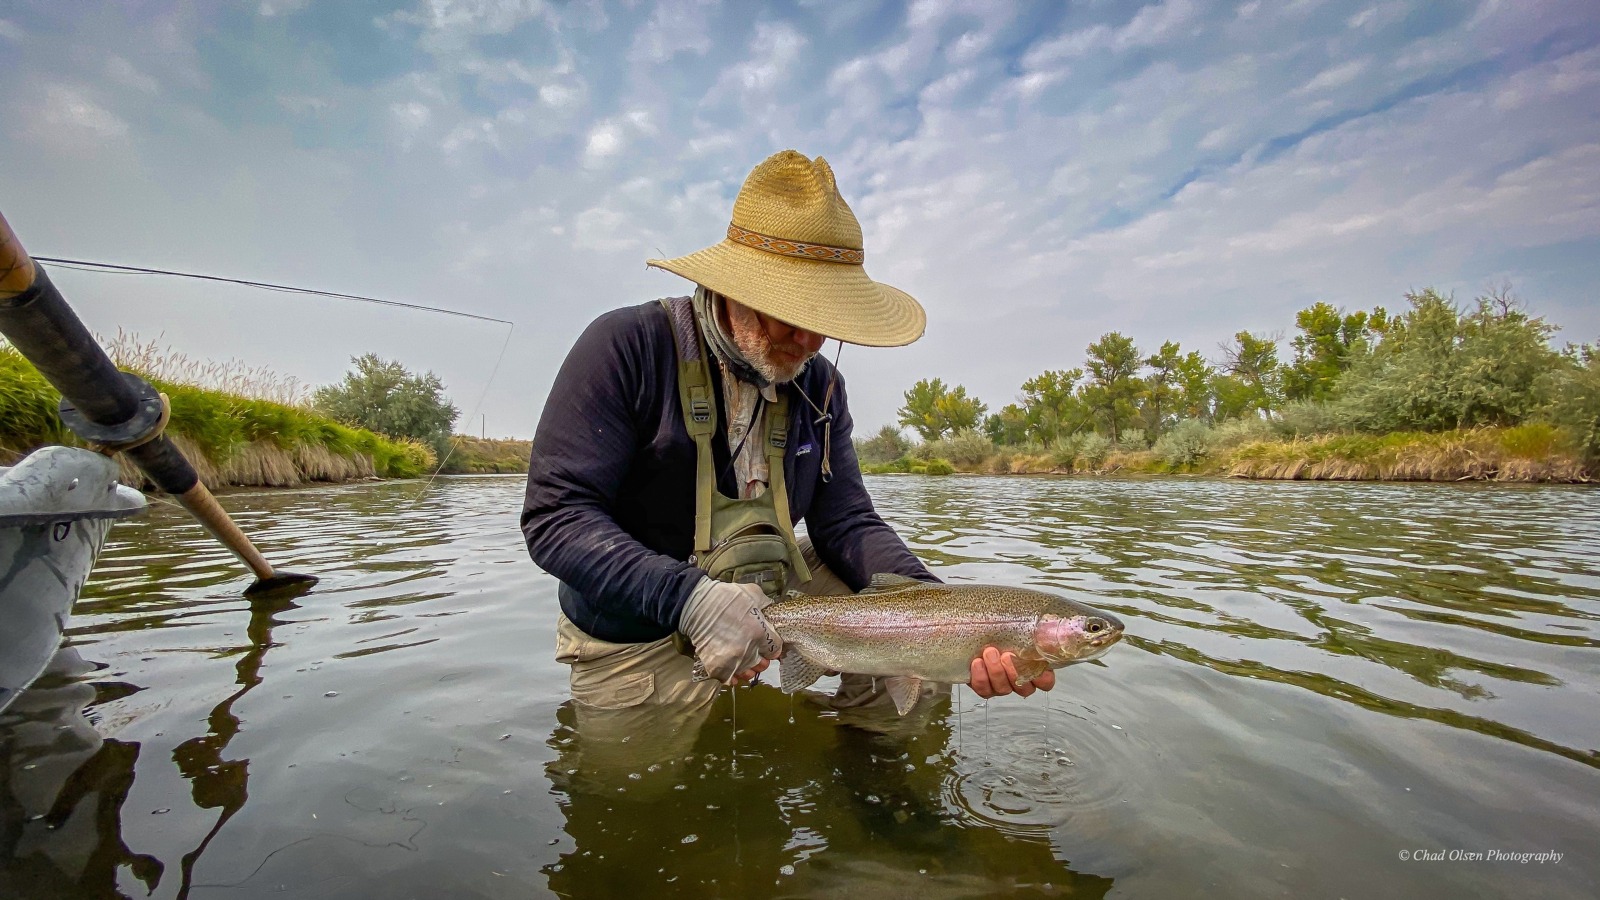 The Drift Boat Fly Fishing Experience… on the Rapid Rise. - Grand